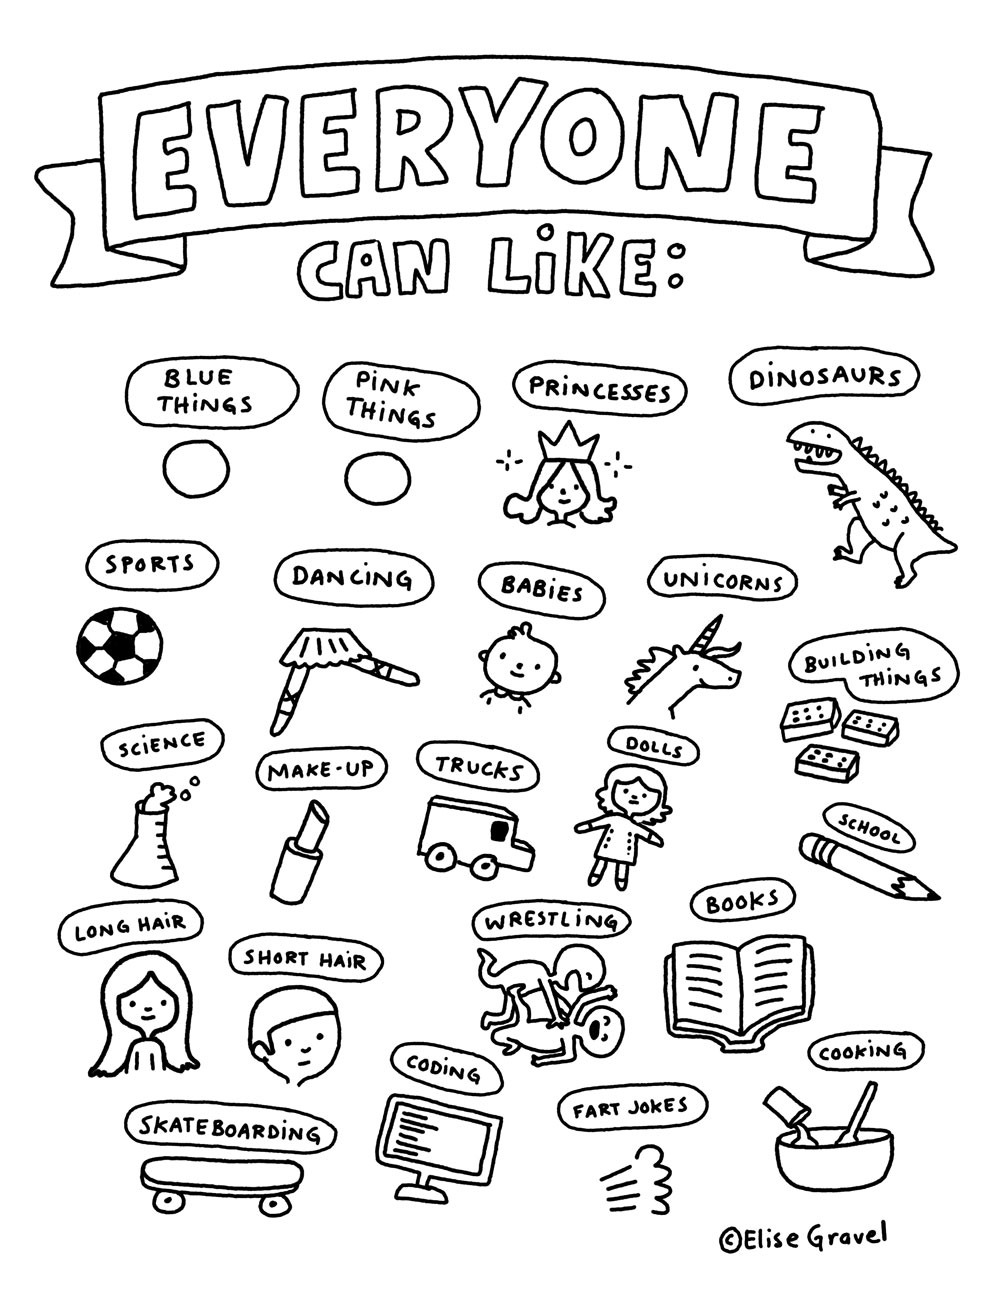 Elise Gravel 'Everyone Can Like' Poster